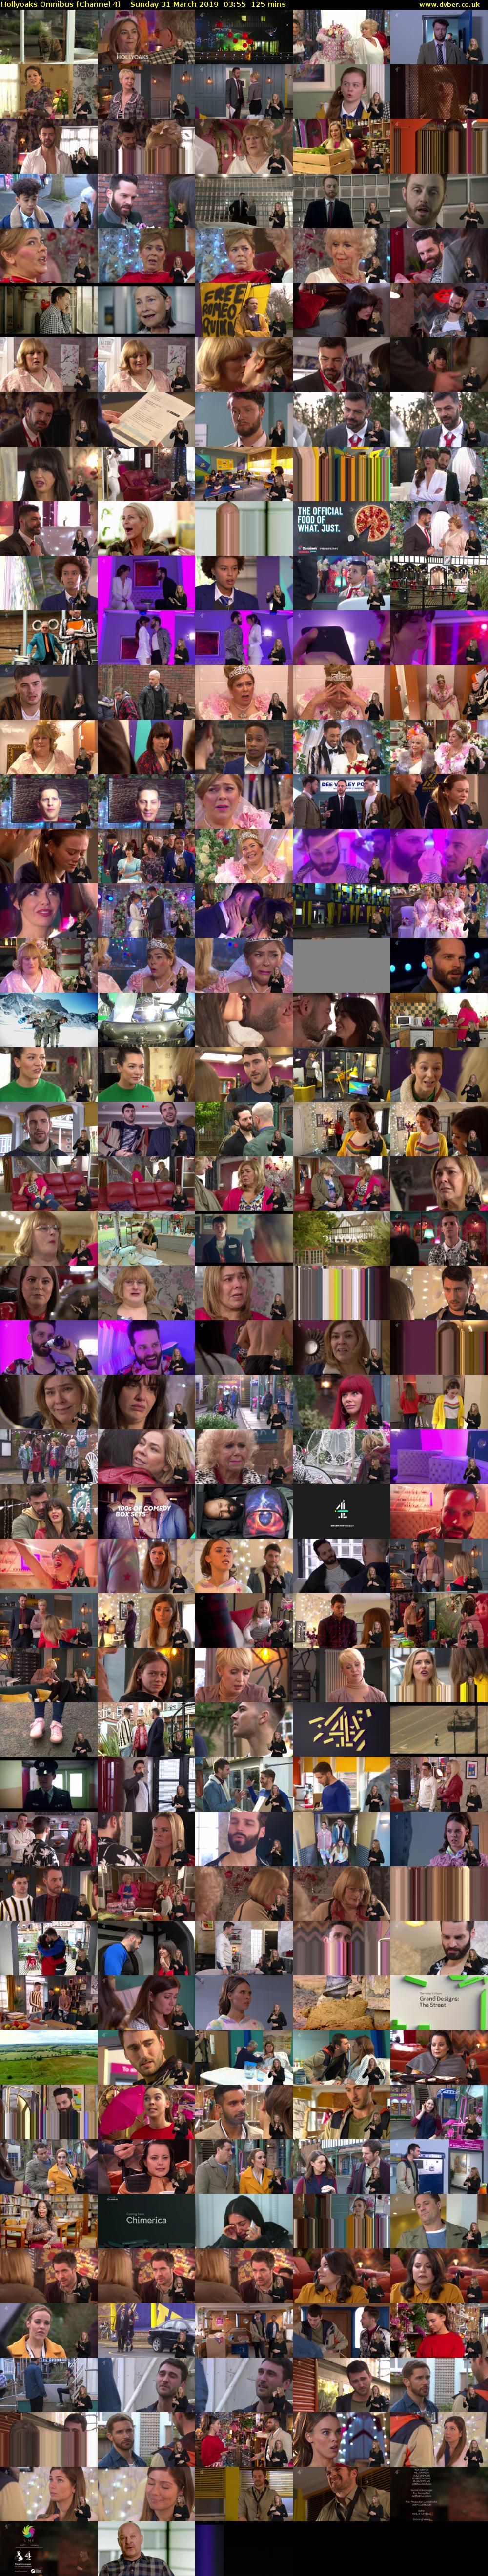 Hollyoaks Omnibus (Channel 4) Sunday 31 March 2019 03:55 - 06:00